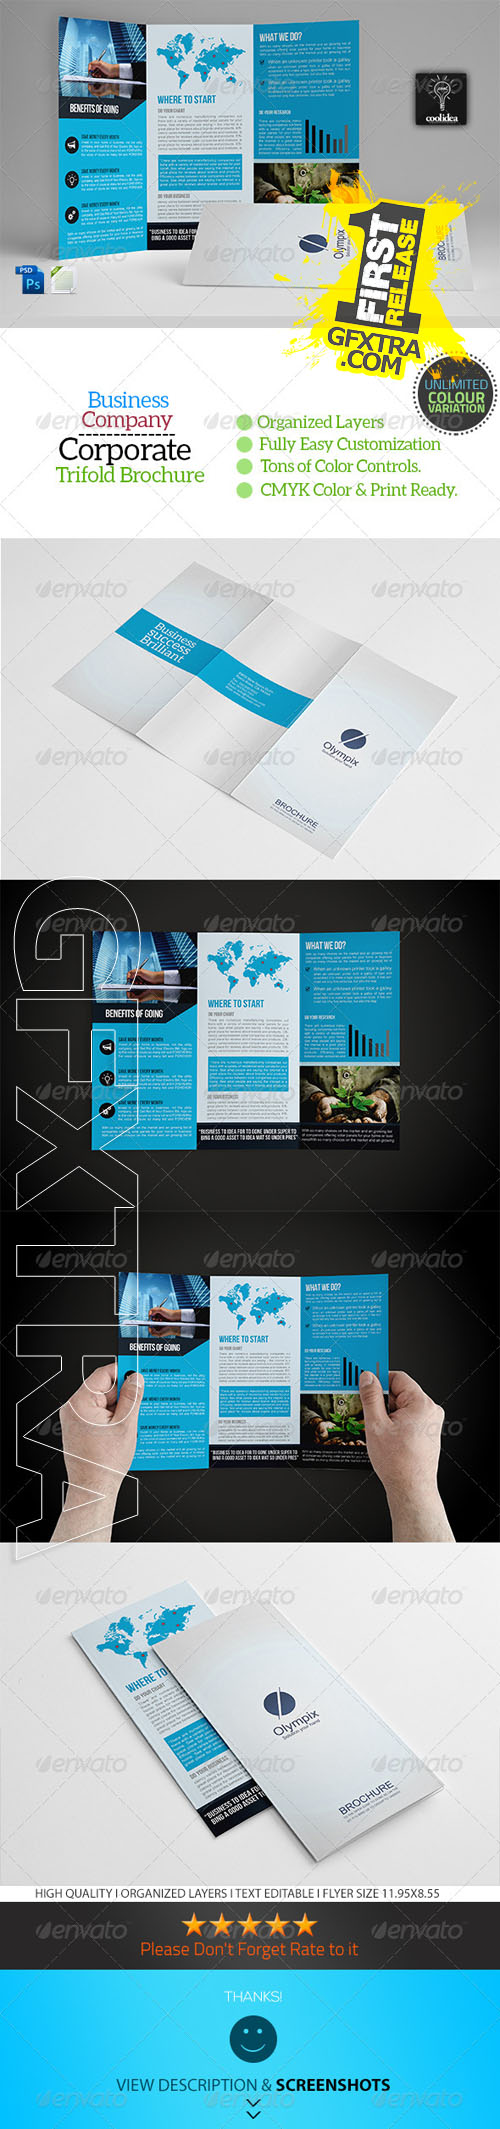 GraphicRiver - A4 Trifold Business Brochure Template Vol01 6756221